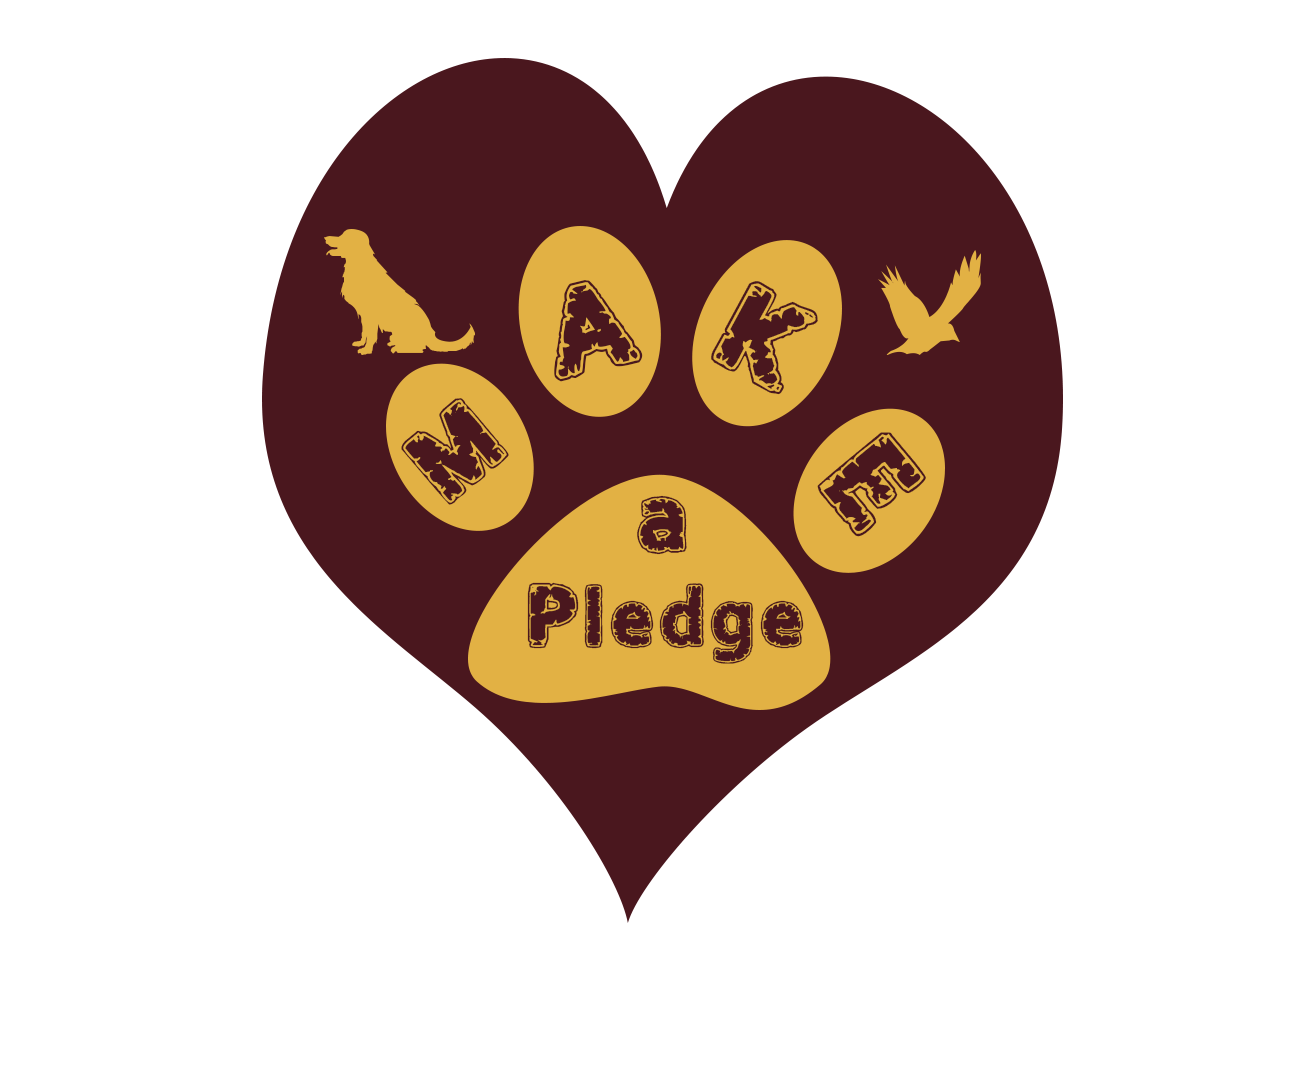 Video Release and Pledge board launch on Animal day | IVSA Nepal